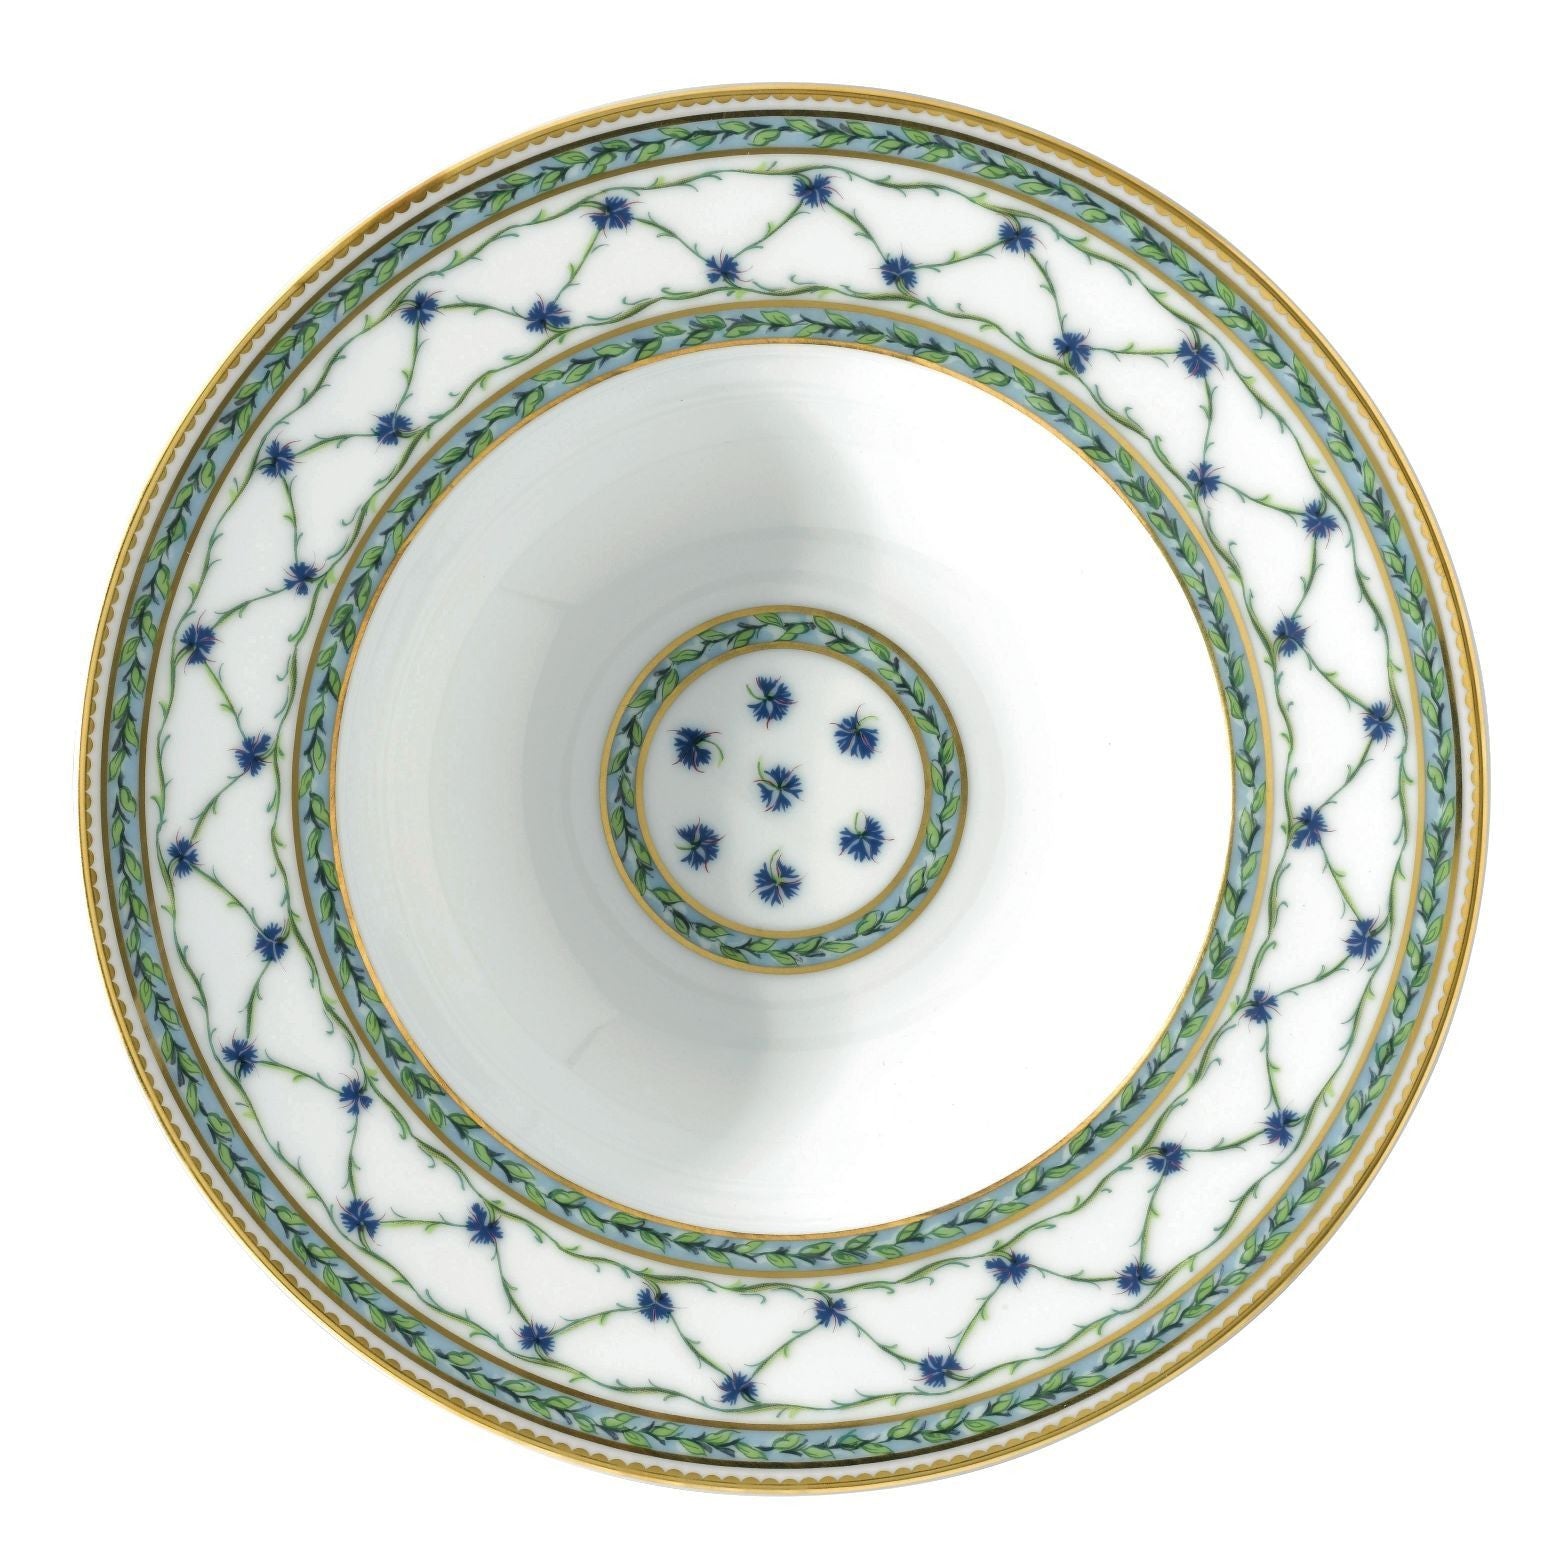 Raynaud's Allee Royale pattern of fine Limoges porcelain, including the round salad plate, is likely to become a treasured family heirloom. Decorated with blue and green floral festoons and a delicate gold band, it will invest any table with old world elegance.